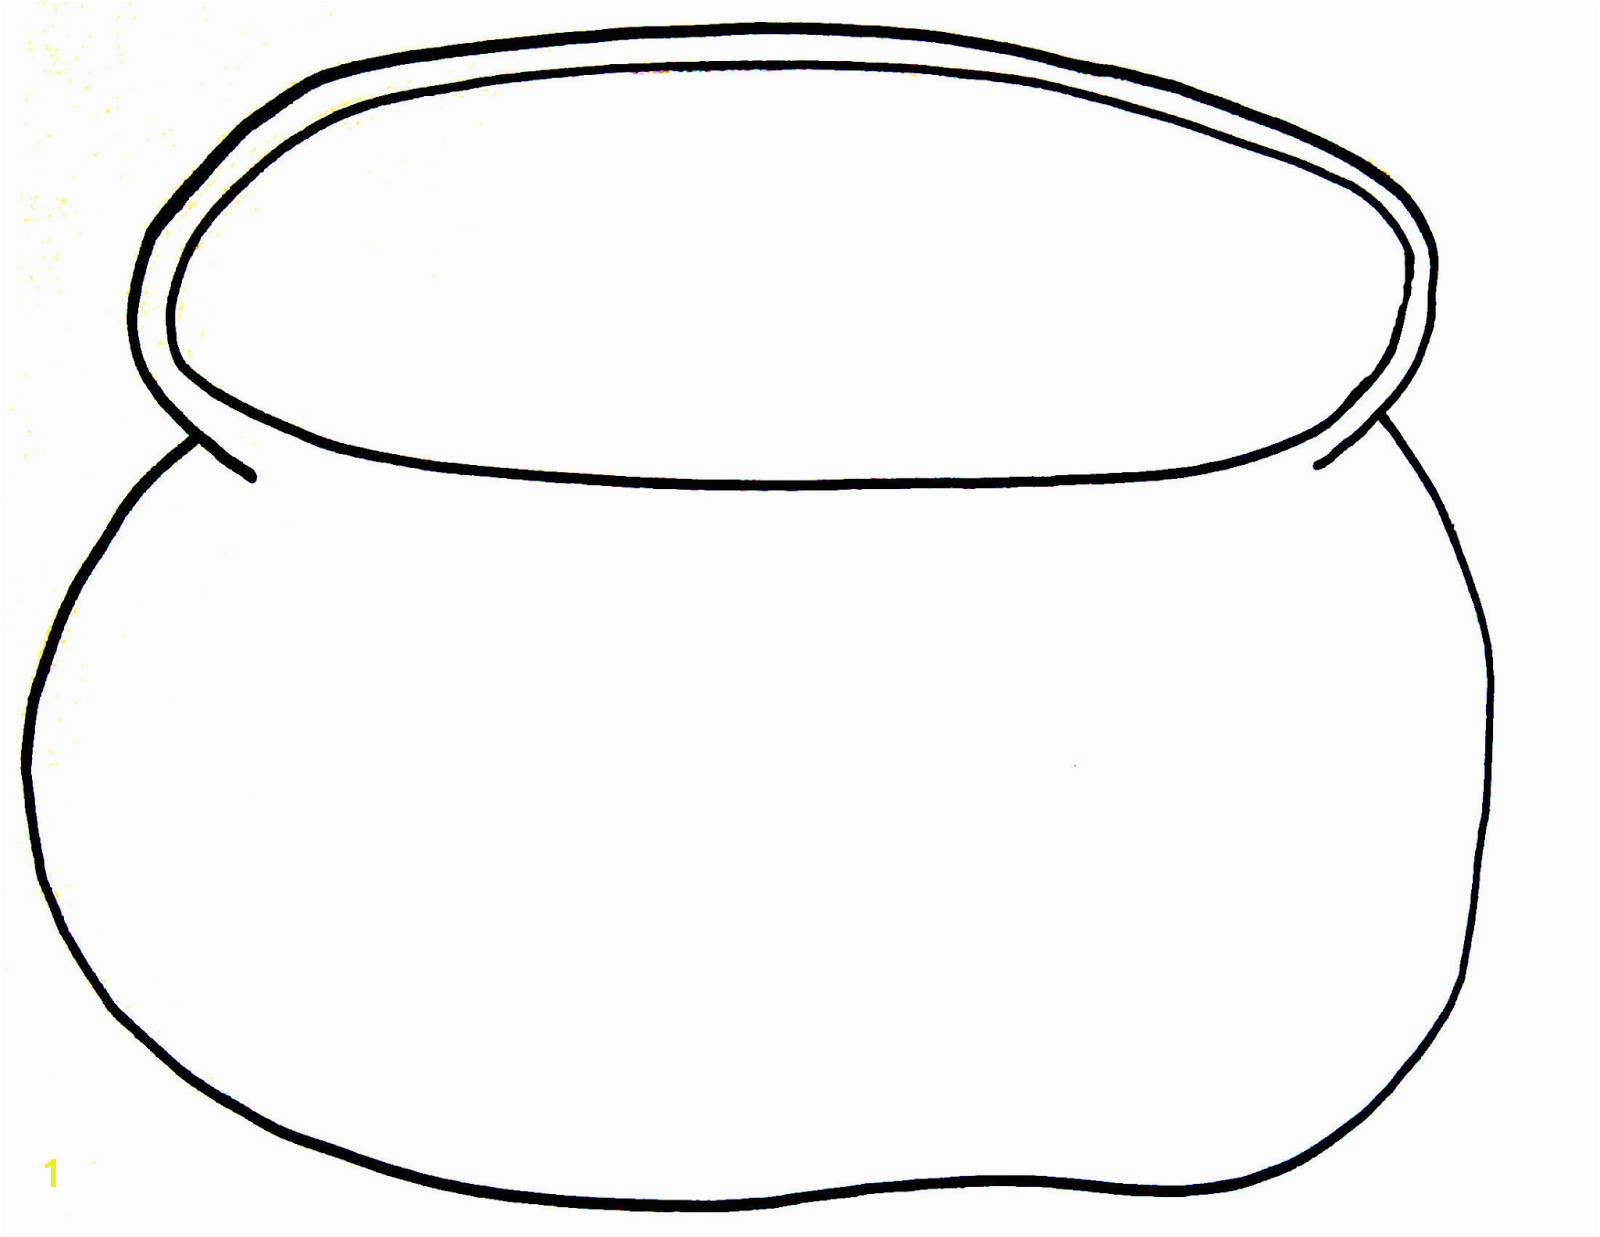 The Empty Pot Coloring Pages the Empty Pot Coloring Pages 4281